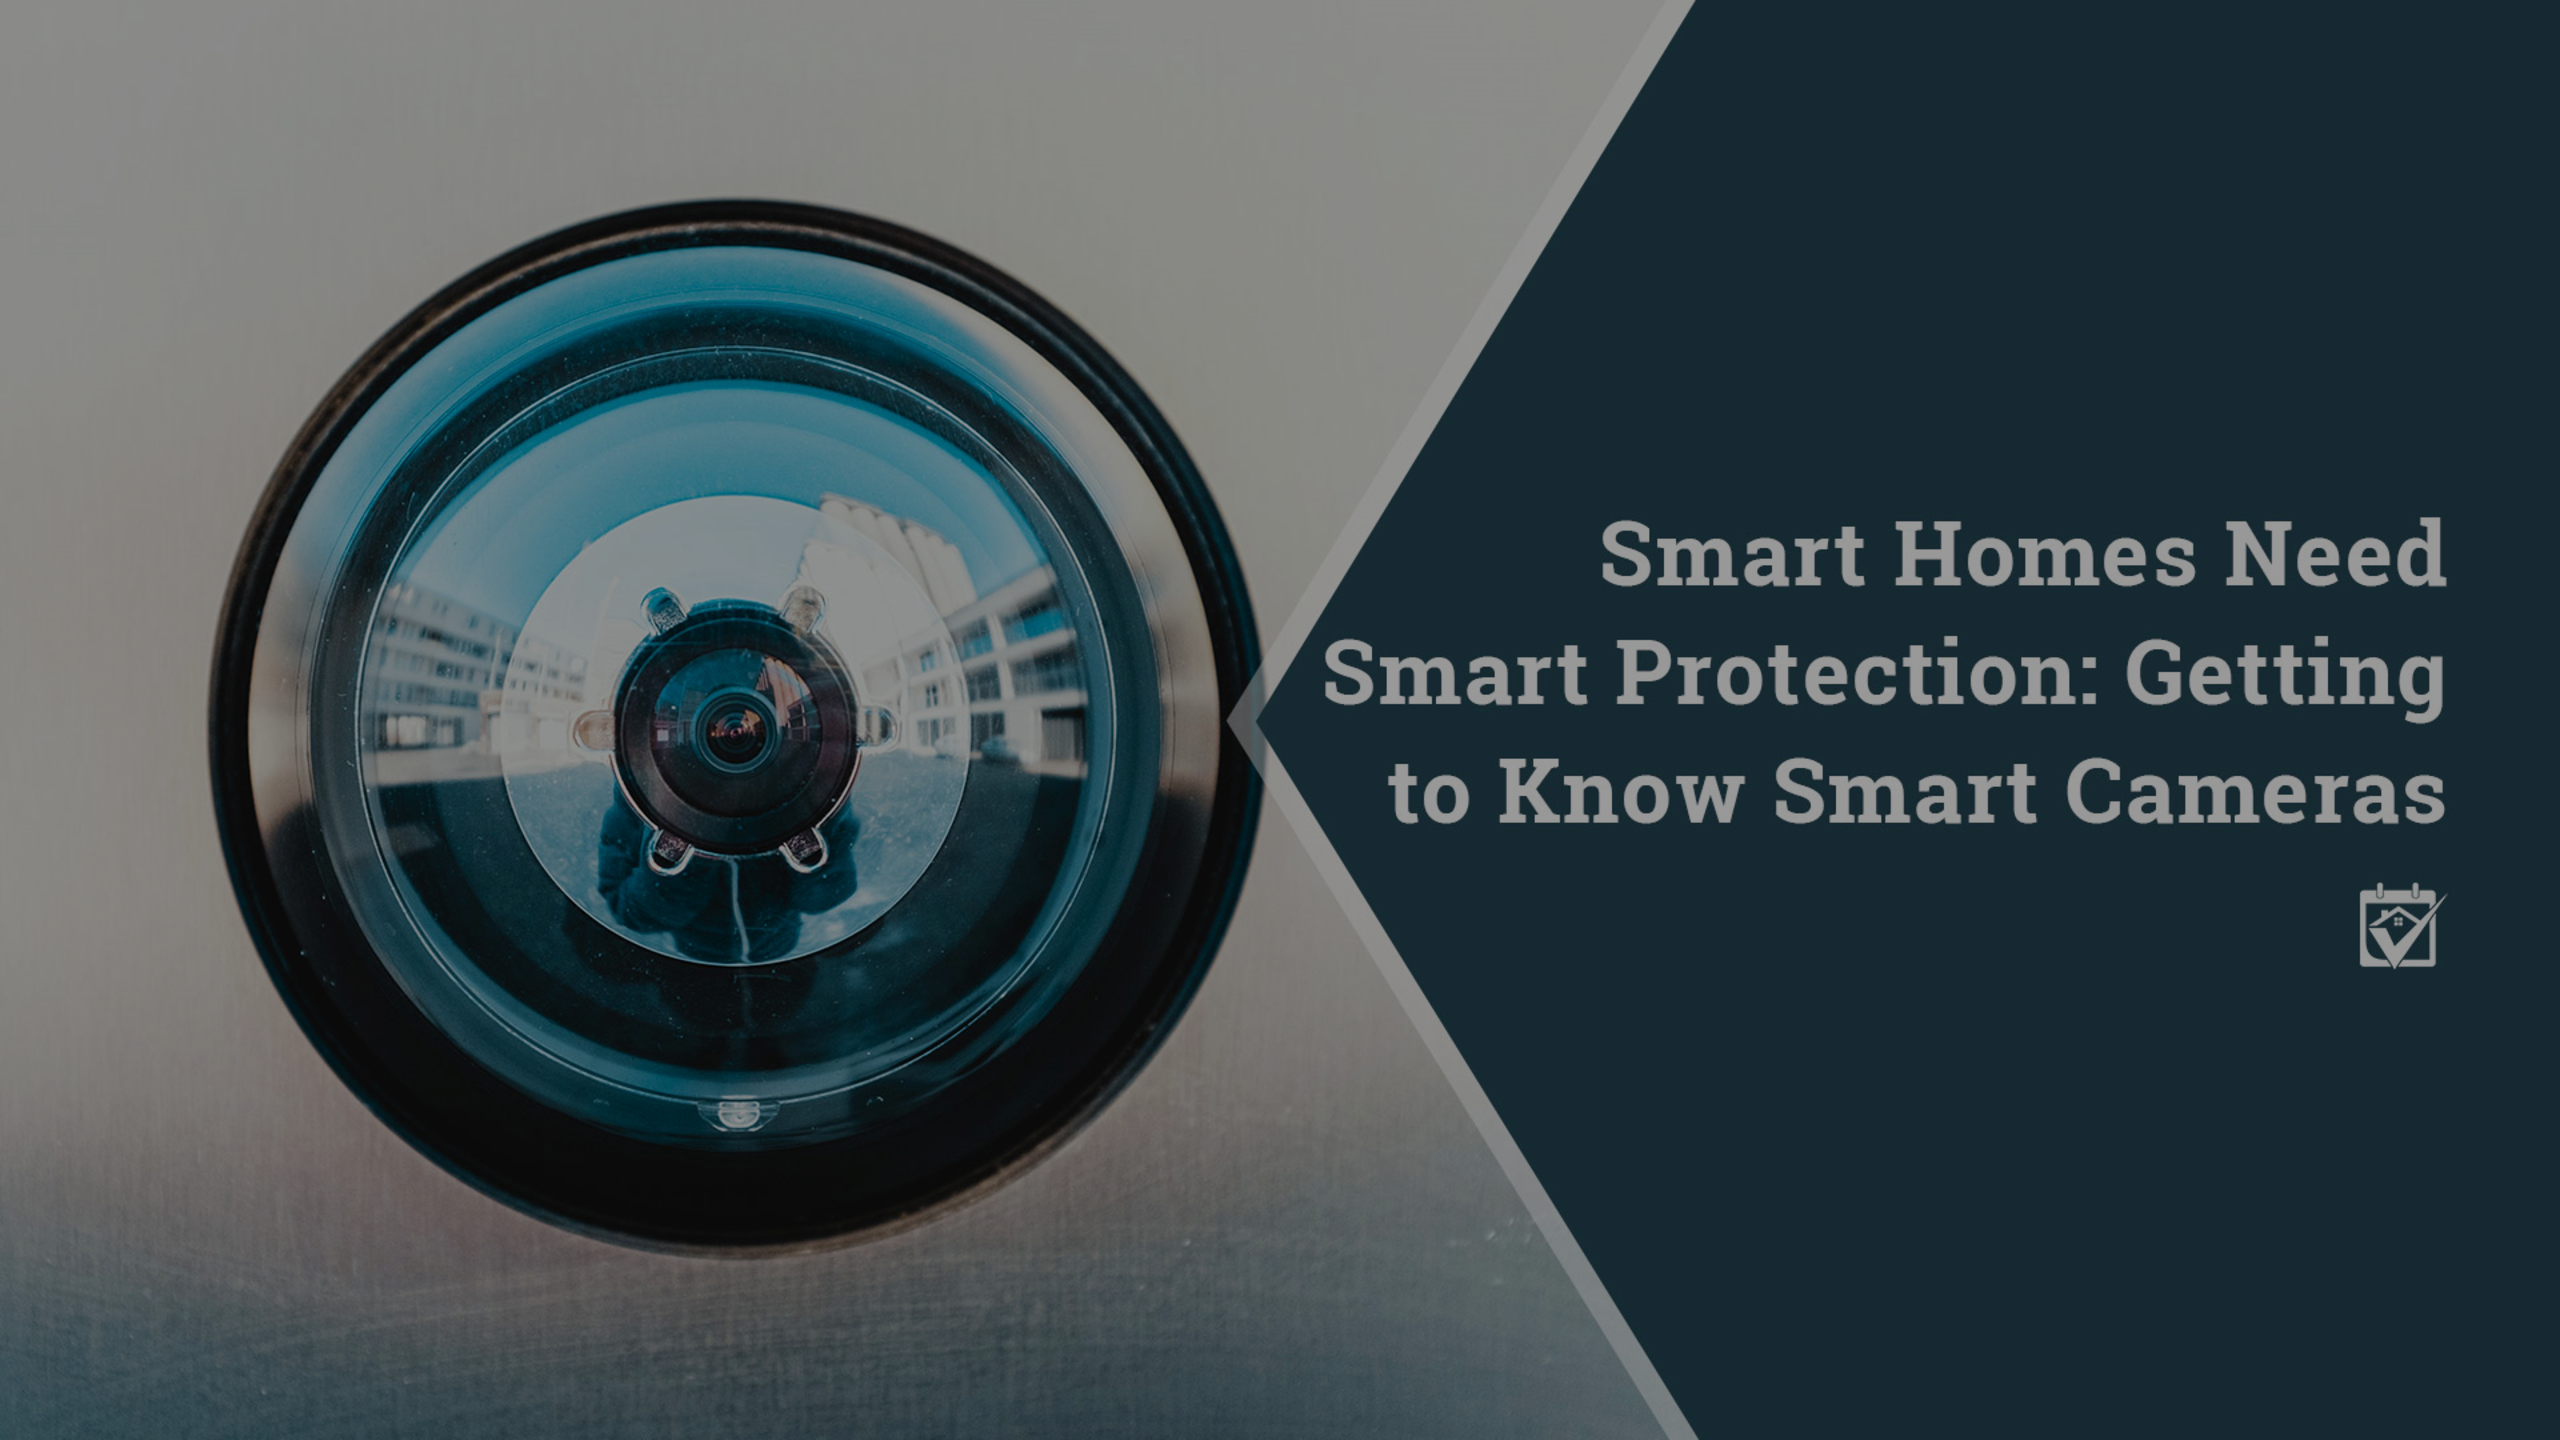 Smart Homes Need Smart Protection: Getting to Know Smart Cameras